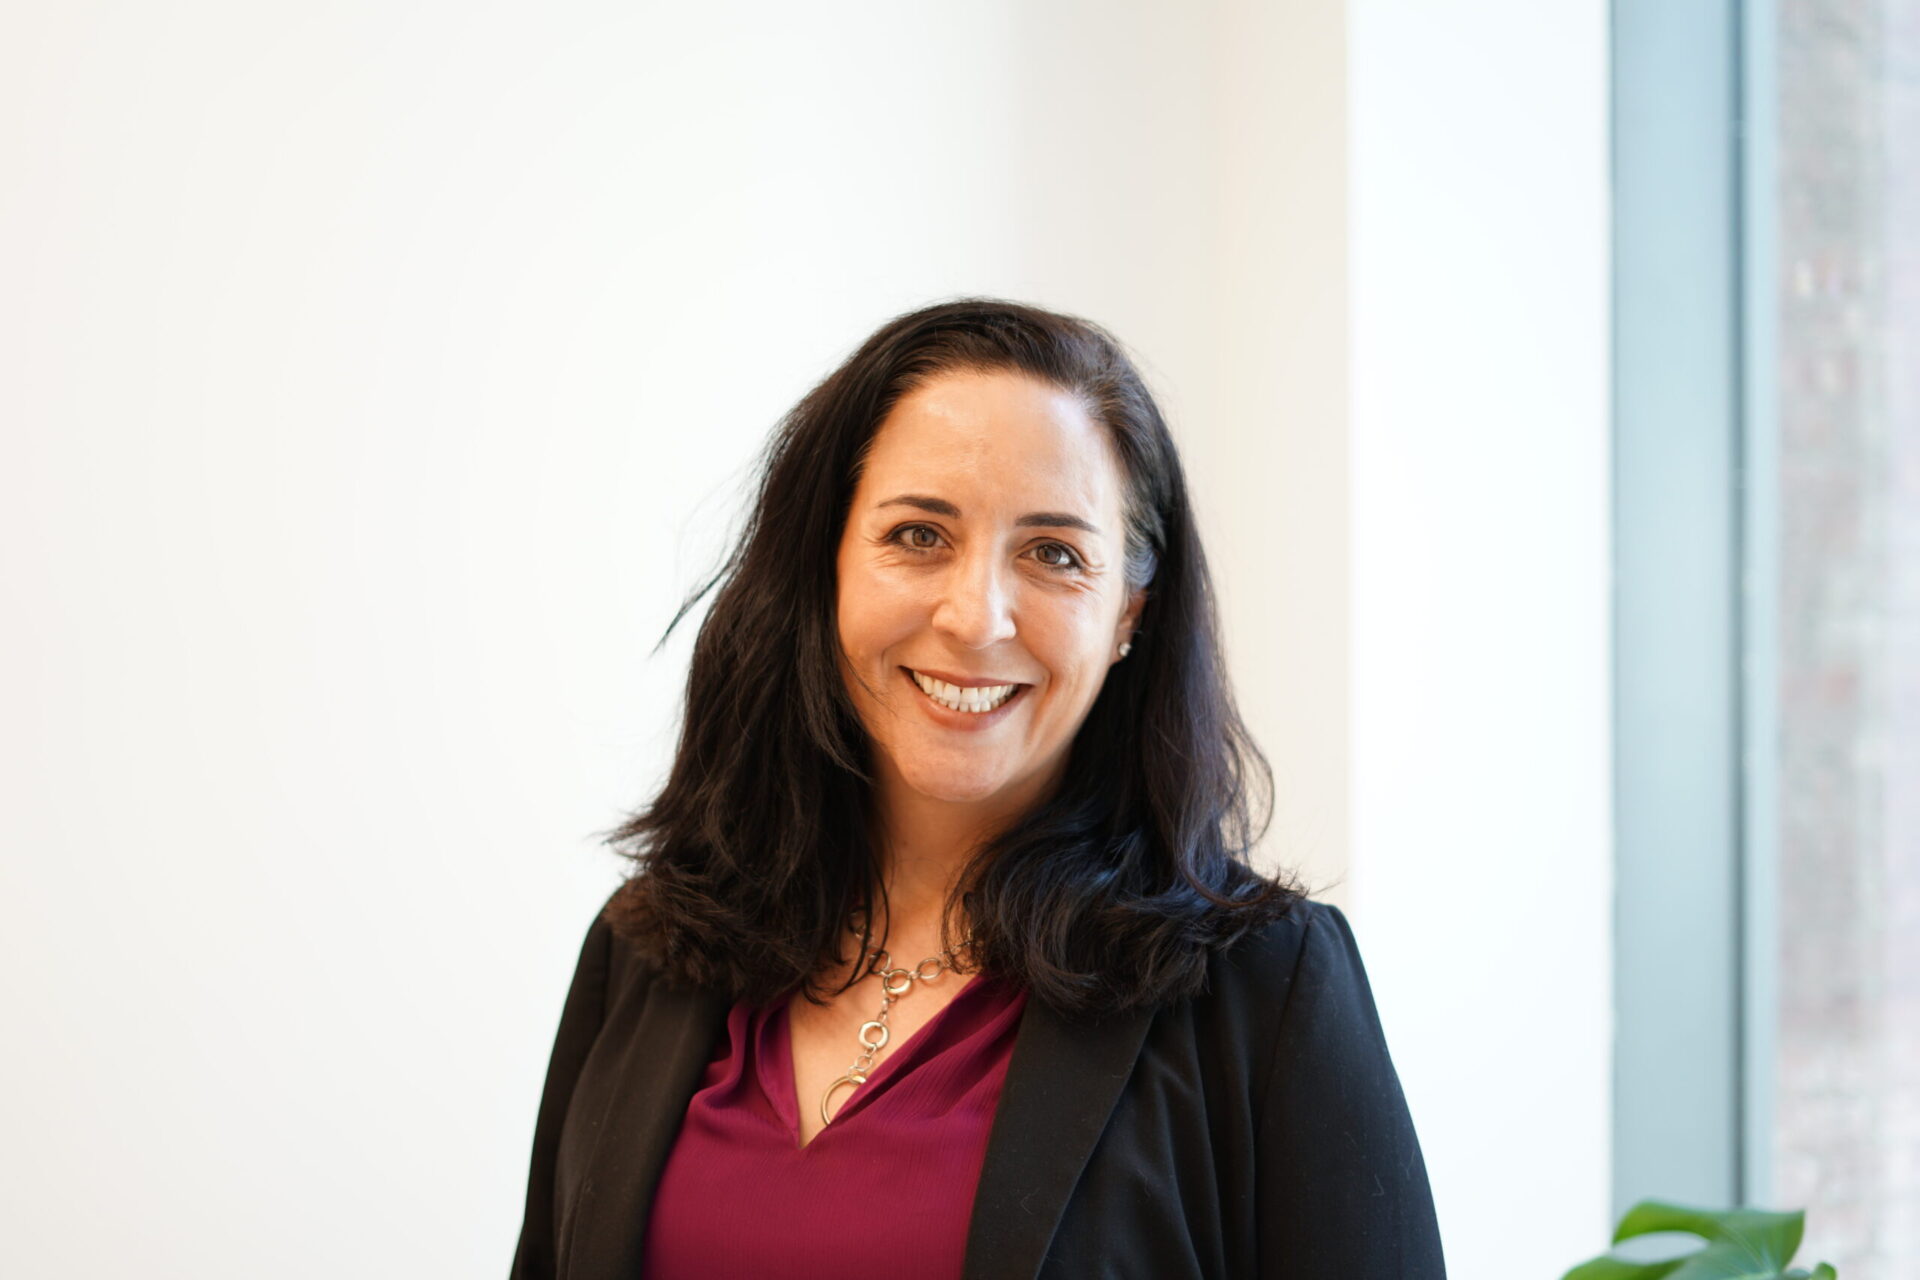 Kyruus Welcomes Gail Airasian as General Manager of Emerging Markets as the Company Expands Its Platform to Serve the Broader Digital Health Market